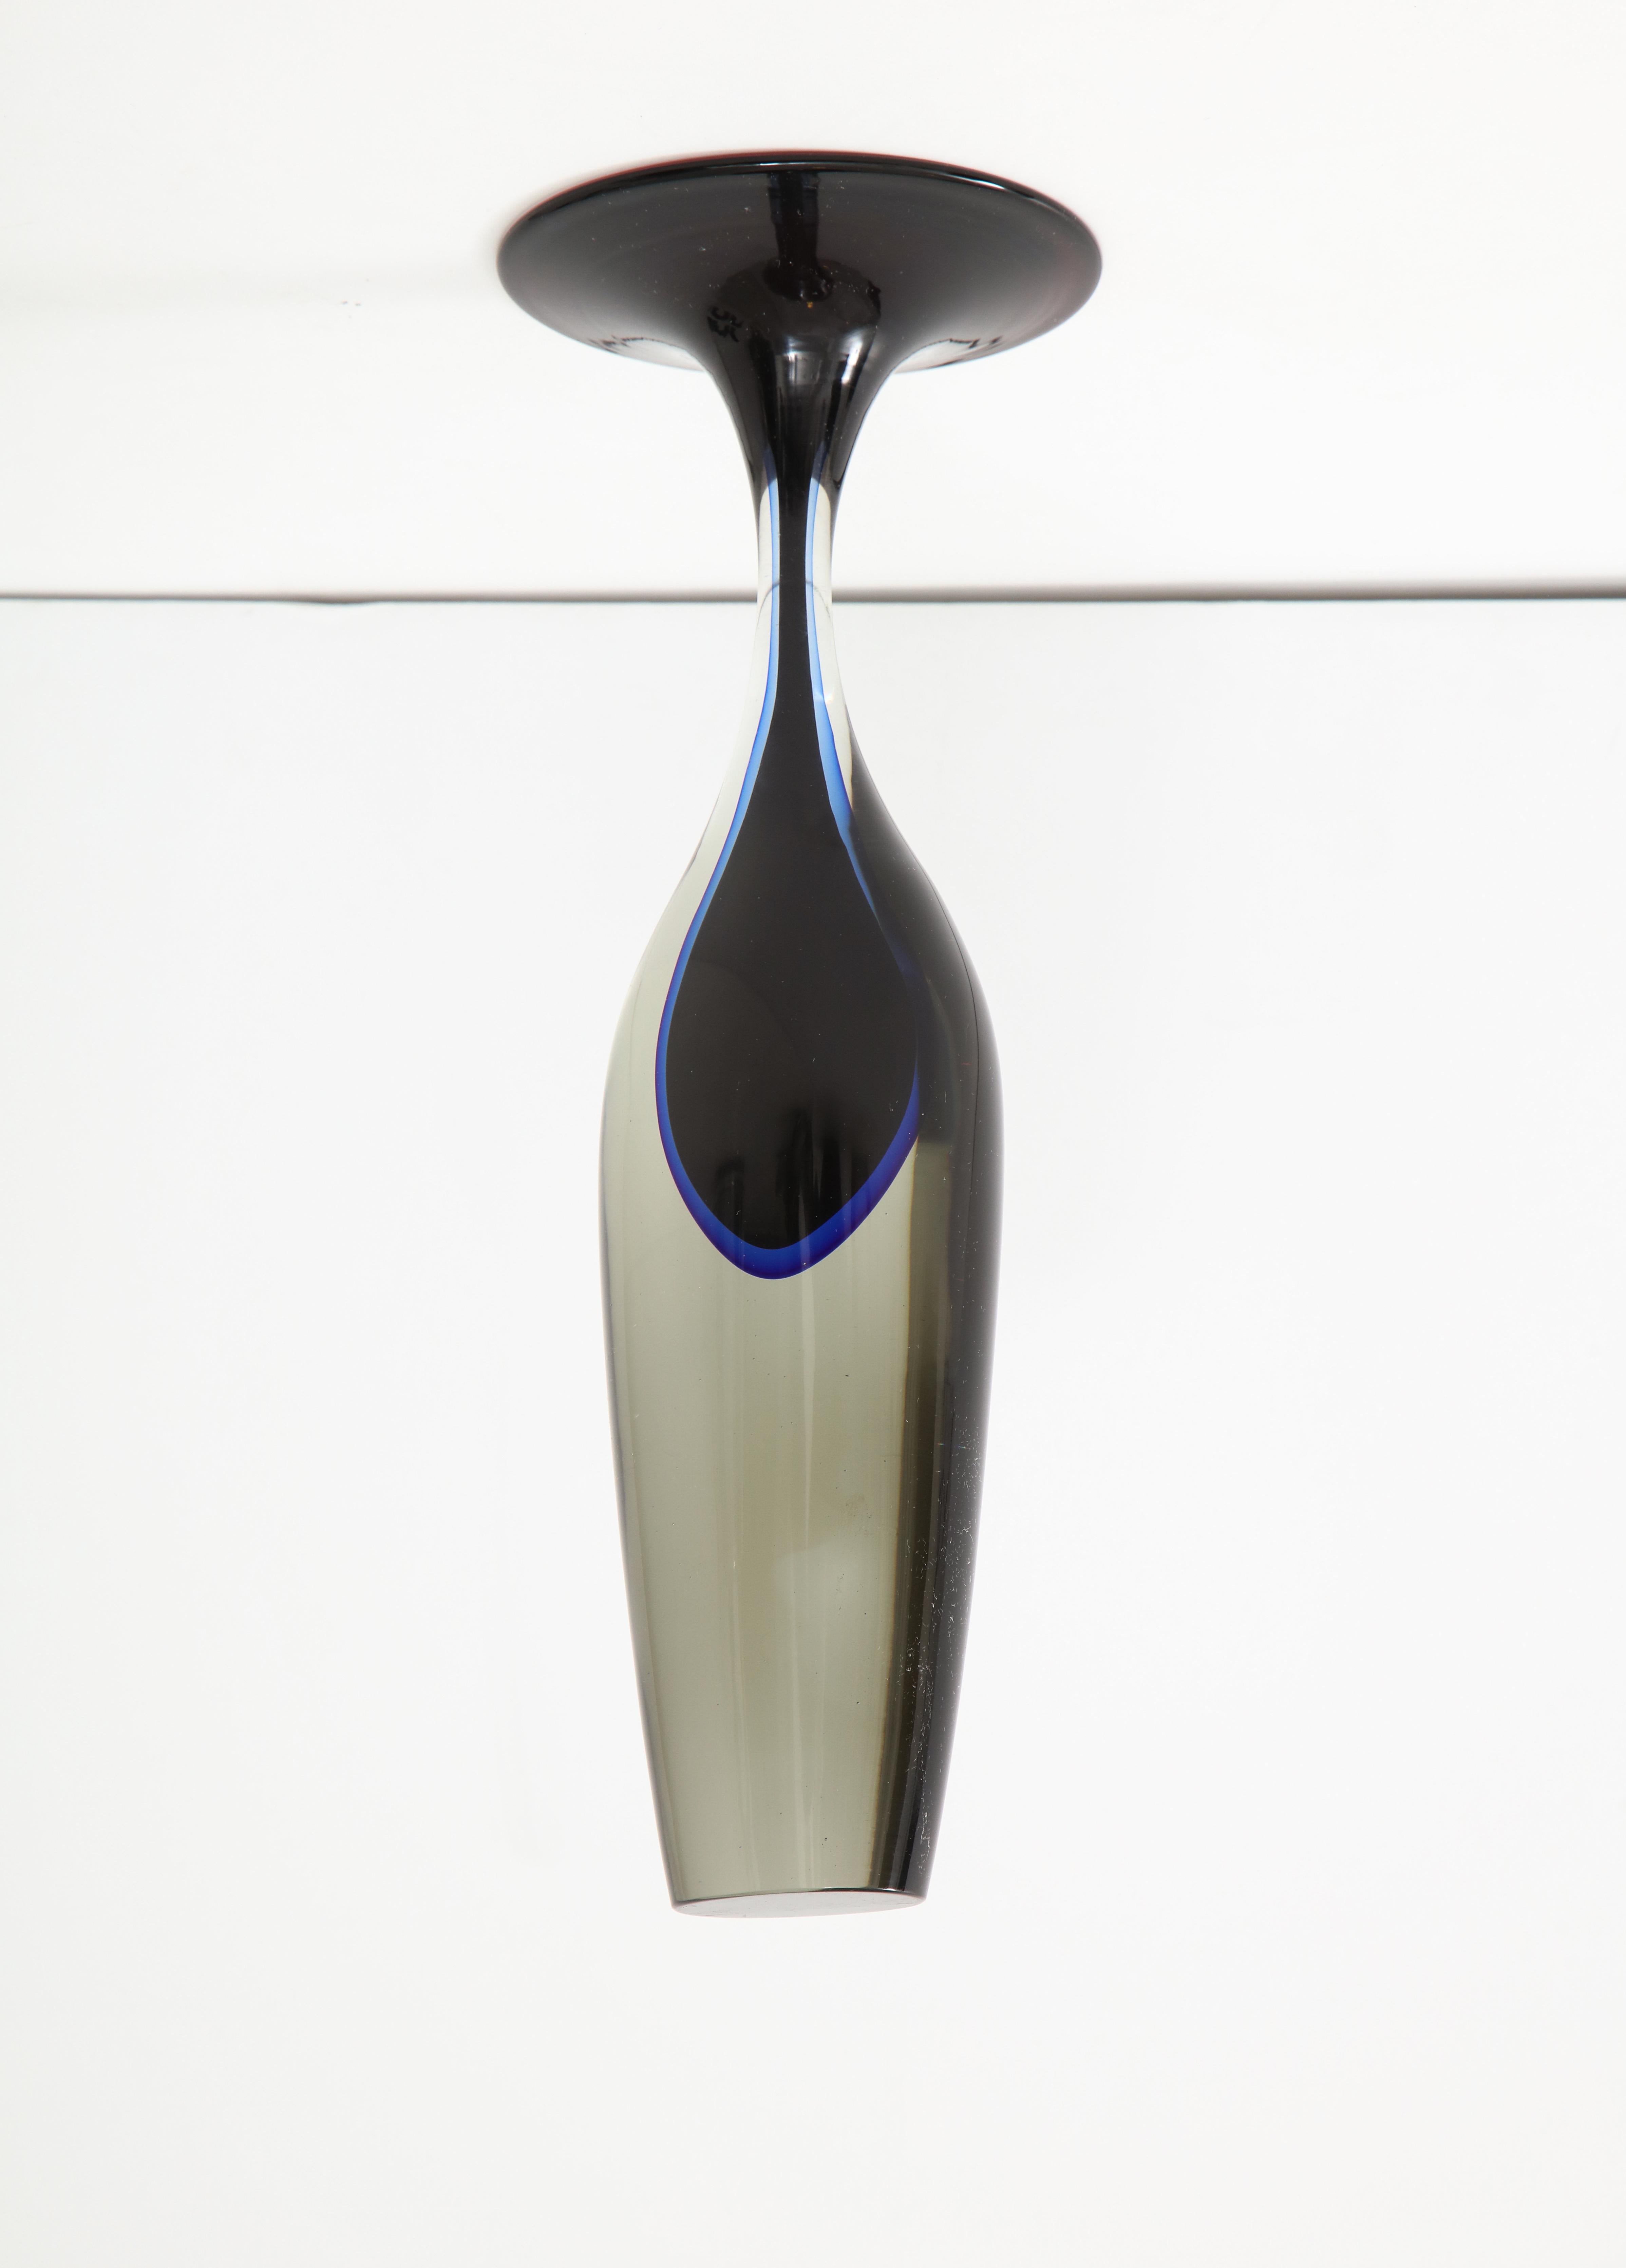 Midcentury Murano solid glass sculpture with a sinuous shape. A deep purple center is suspended within the thick smoked glass body. Sculpture can be oriented 2 ways.